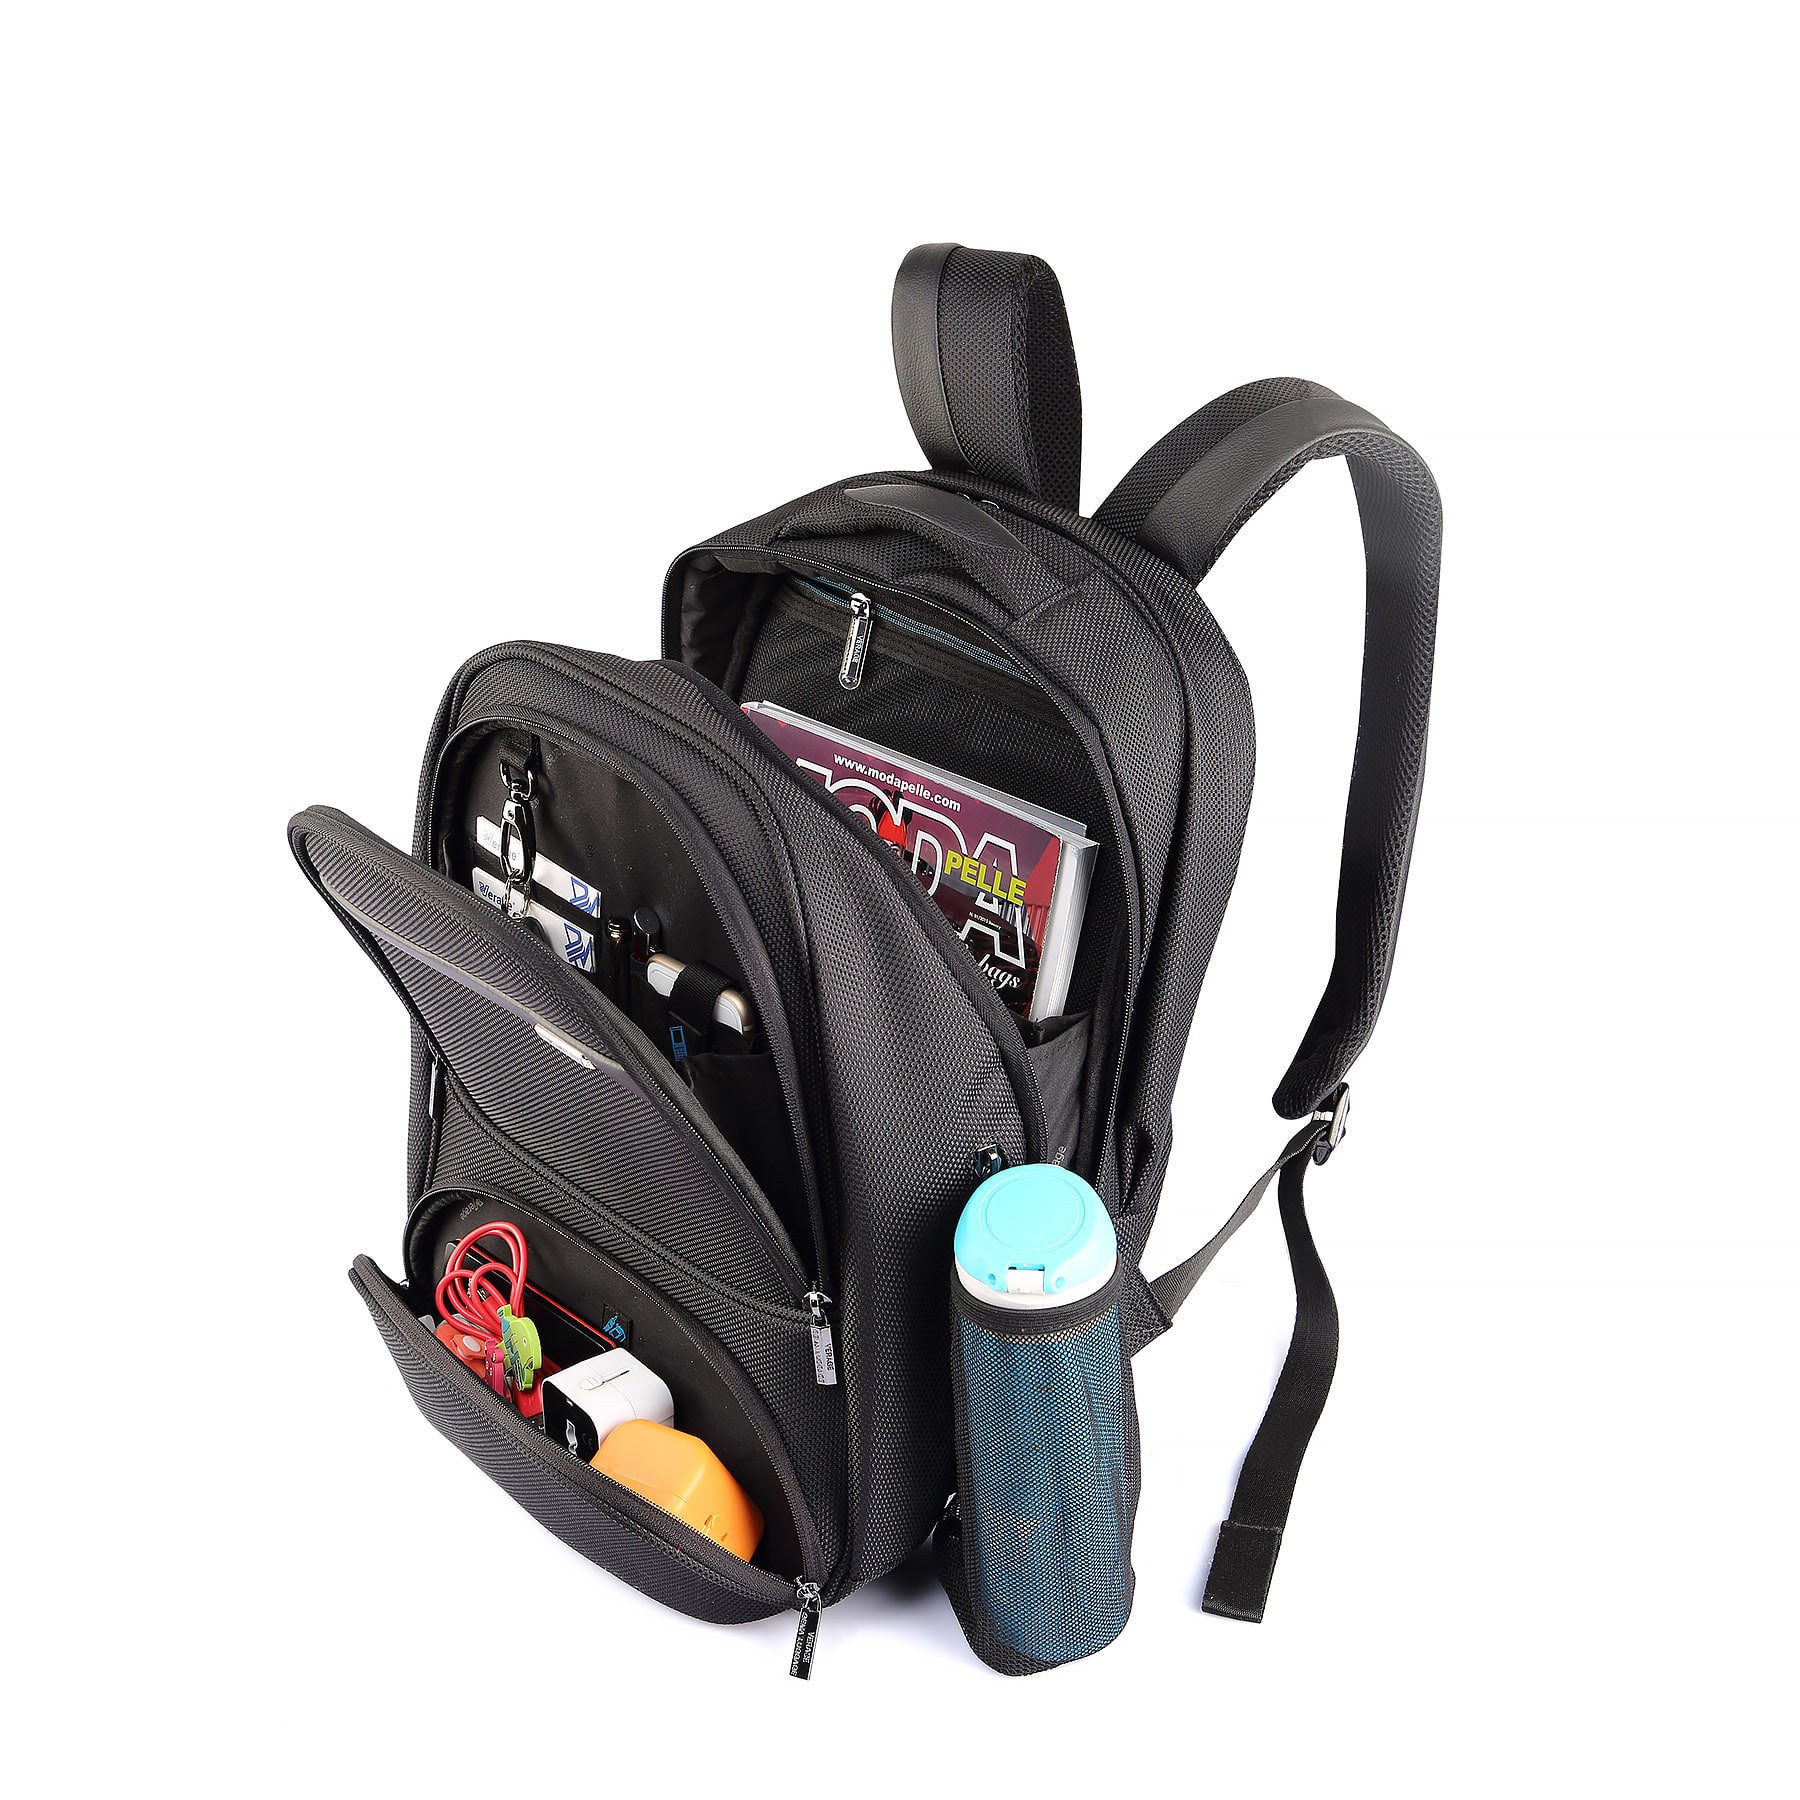 Rolling Backpacks – Rewards Of Owning One